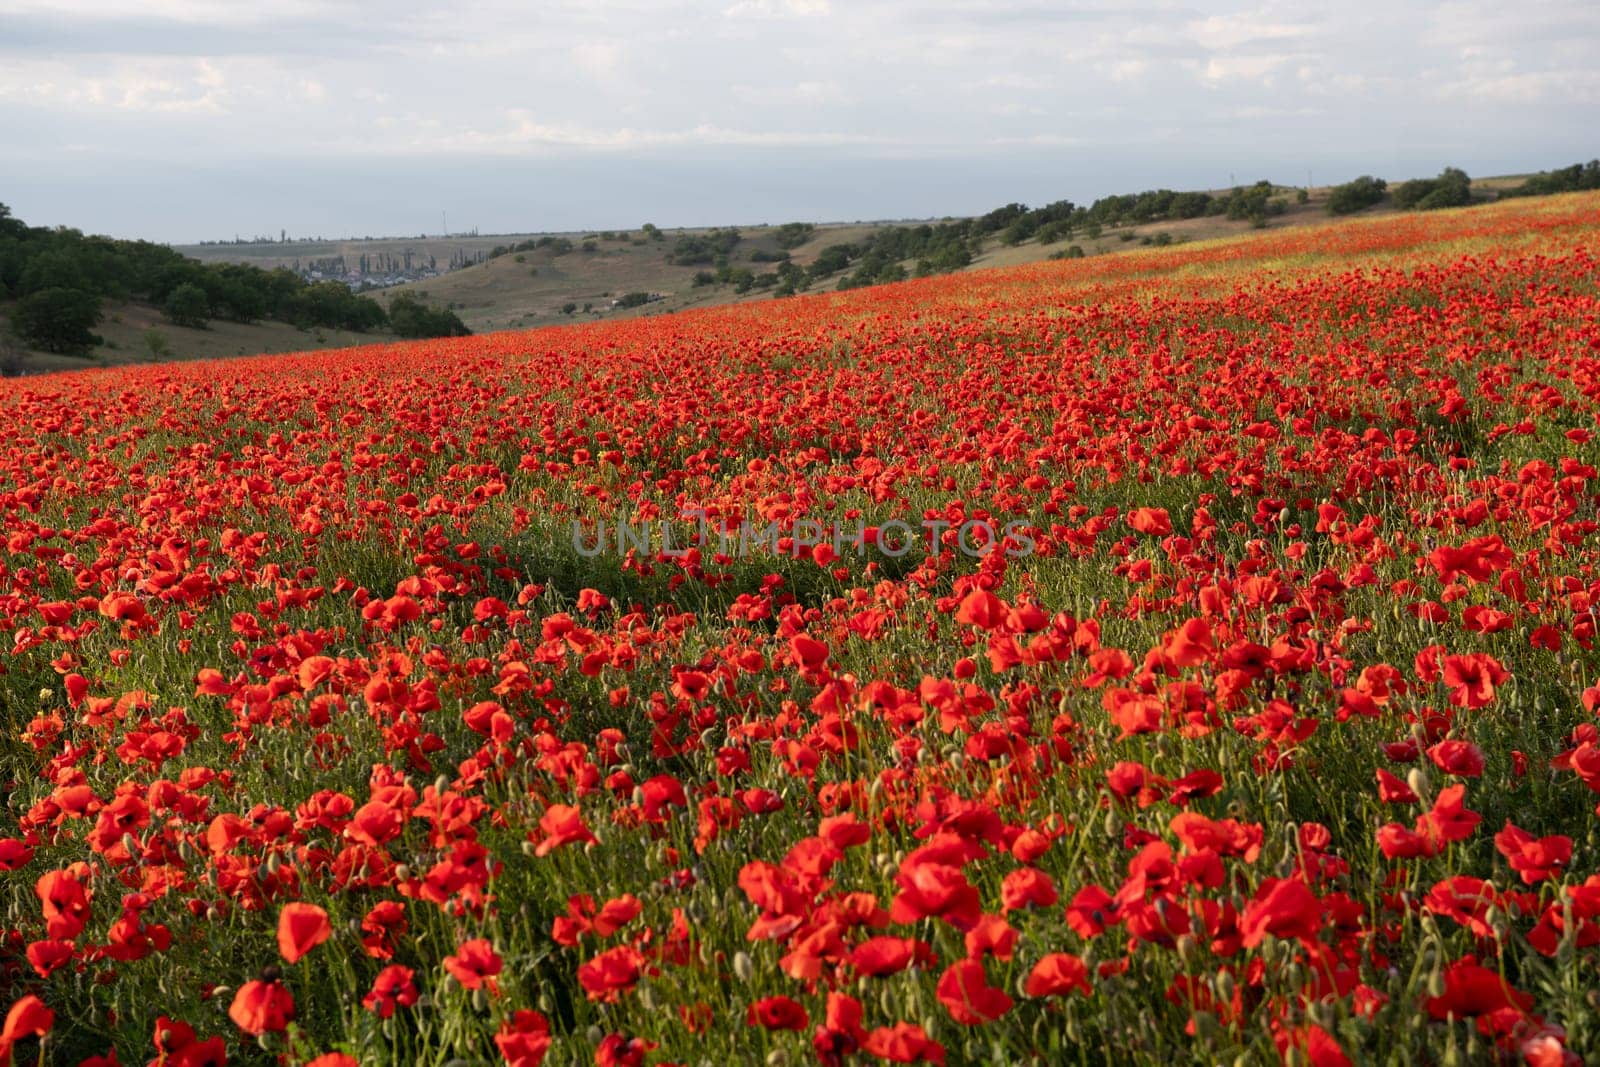 A field of red poppies with a blue sky in the background